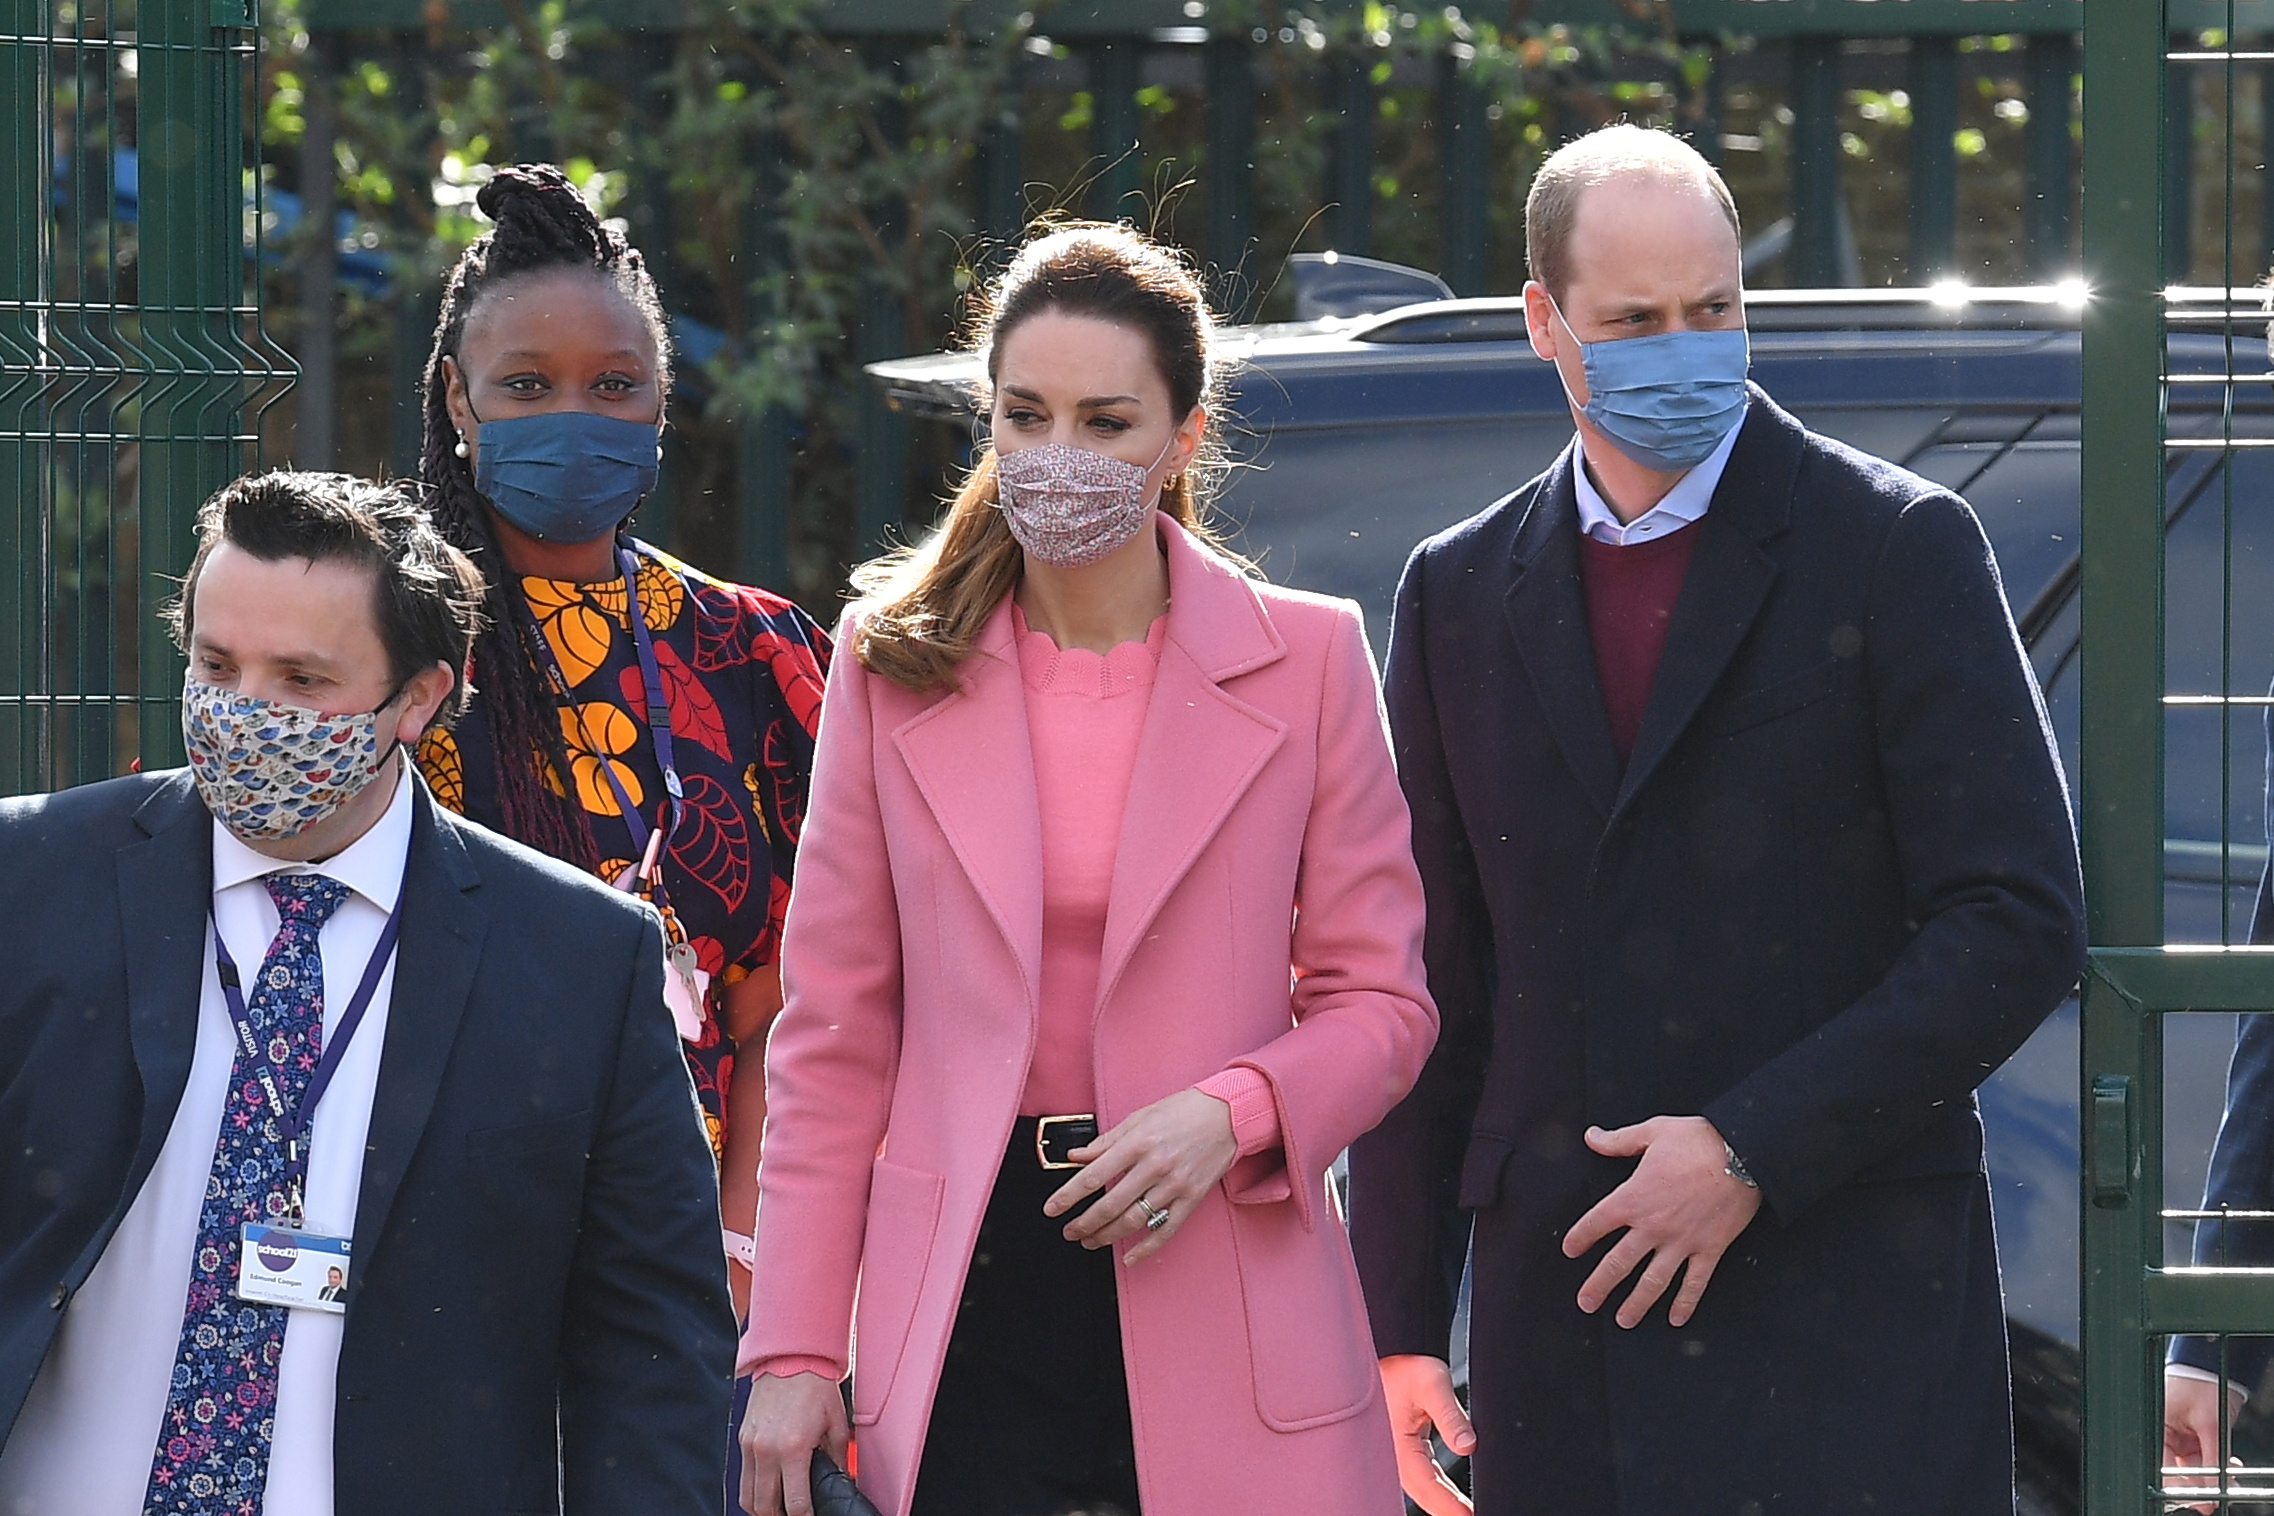 Britain's Prince William and Catherine, Duchess of Cambridge visit to School 21 in London